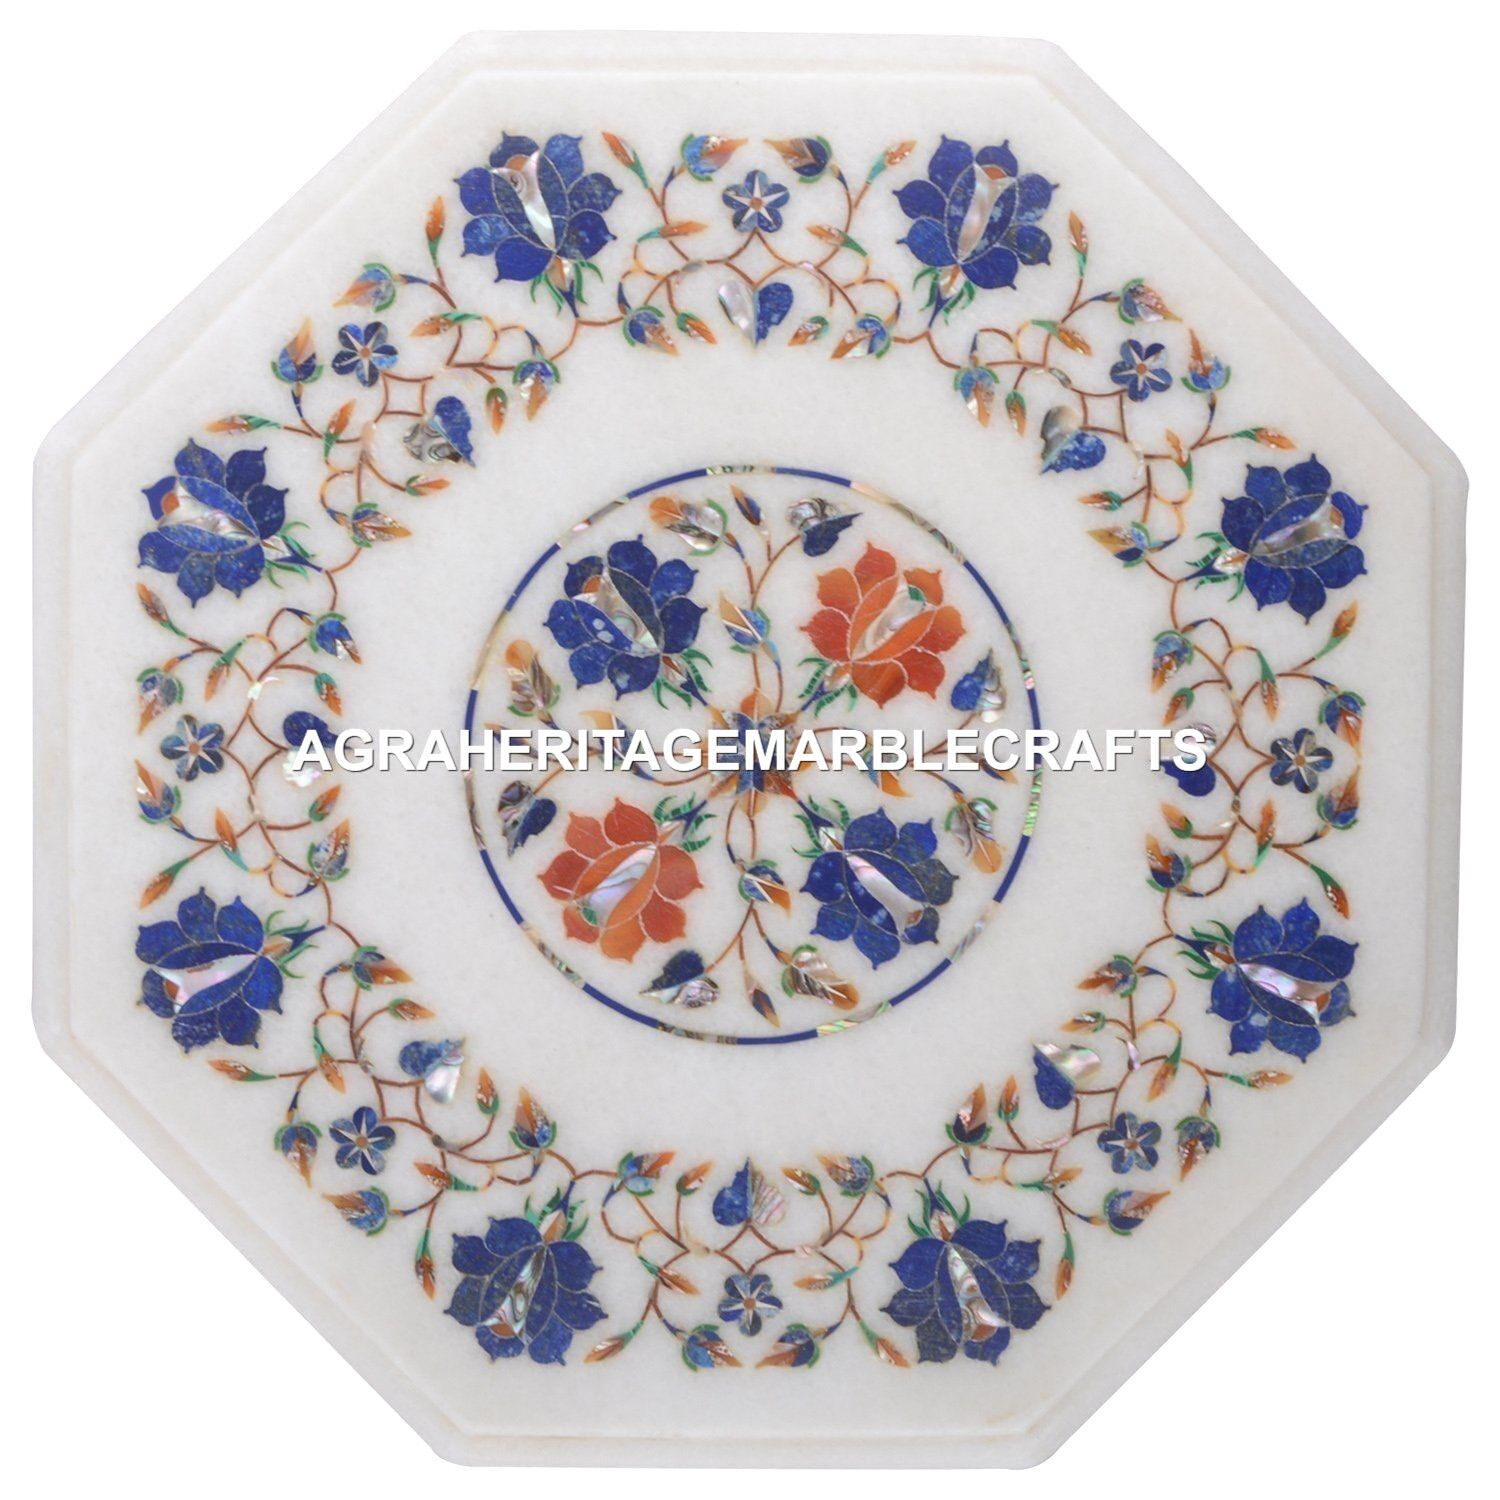 White Marble Coffee Table Top Rare Lapis Lazuli Inlay Marquetry Furniture H2473 - $304.26 - $406.02